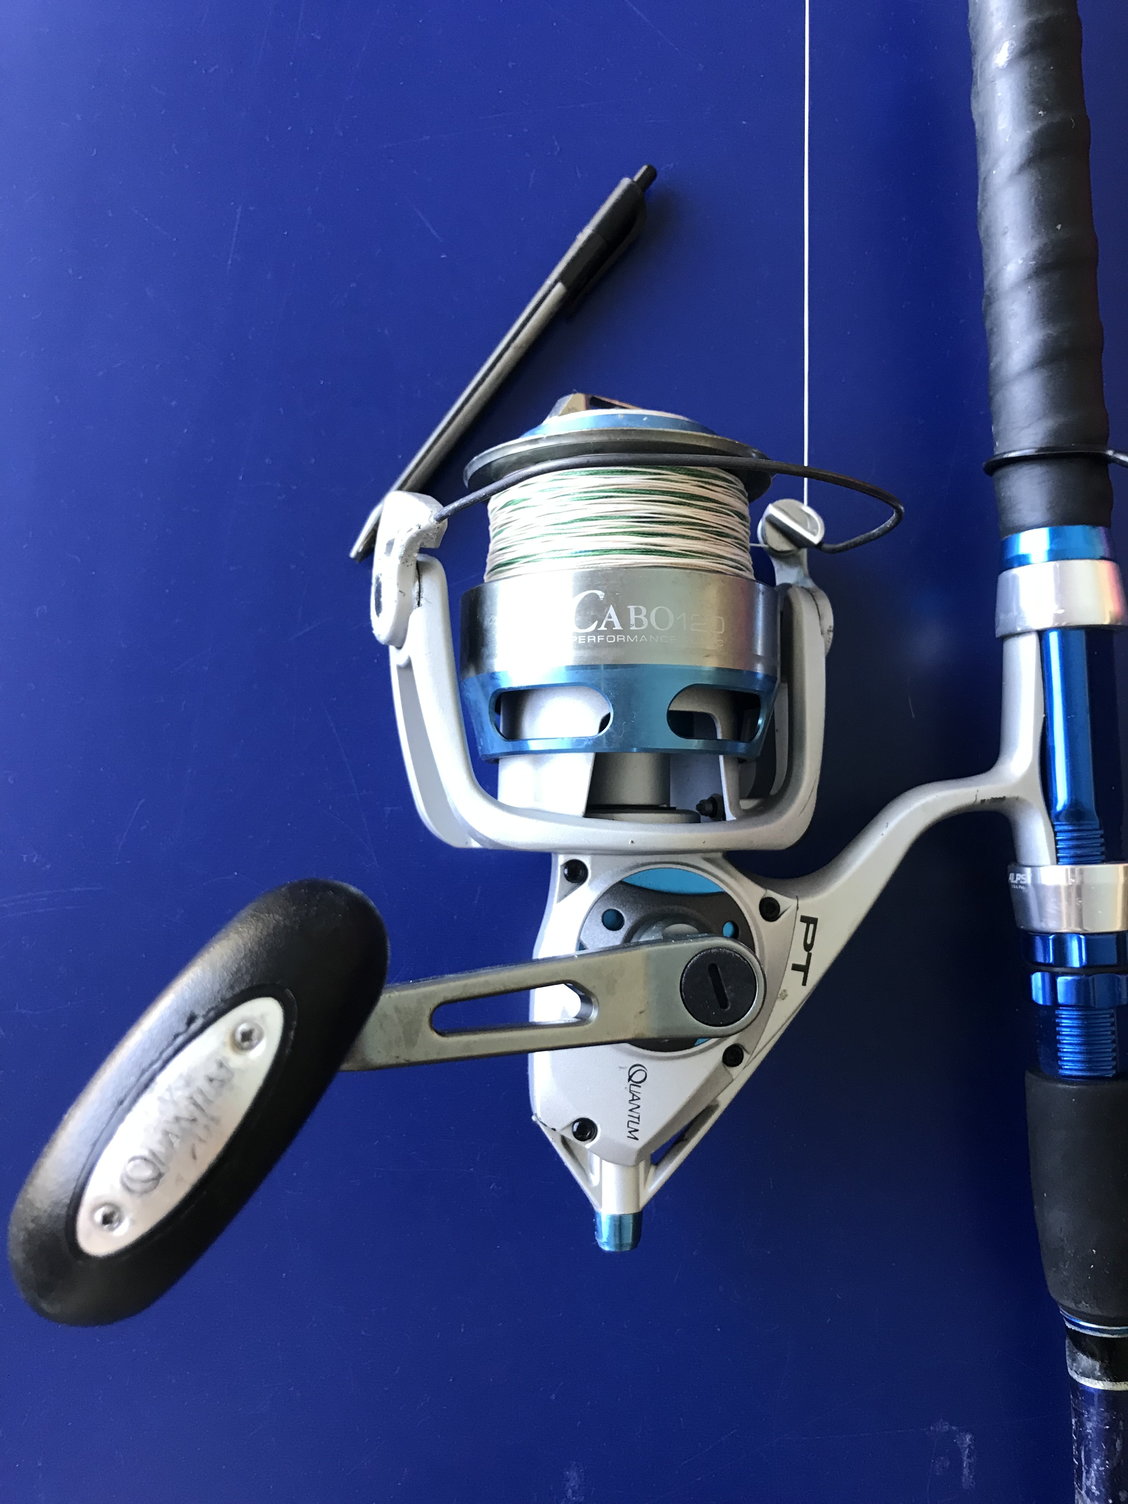 Keeper Grouper vs Spinning reels - Page 3 - The Hull Truth - Boating and  Fishing Forum